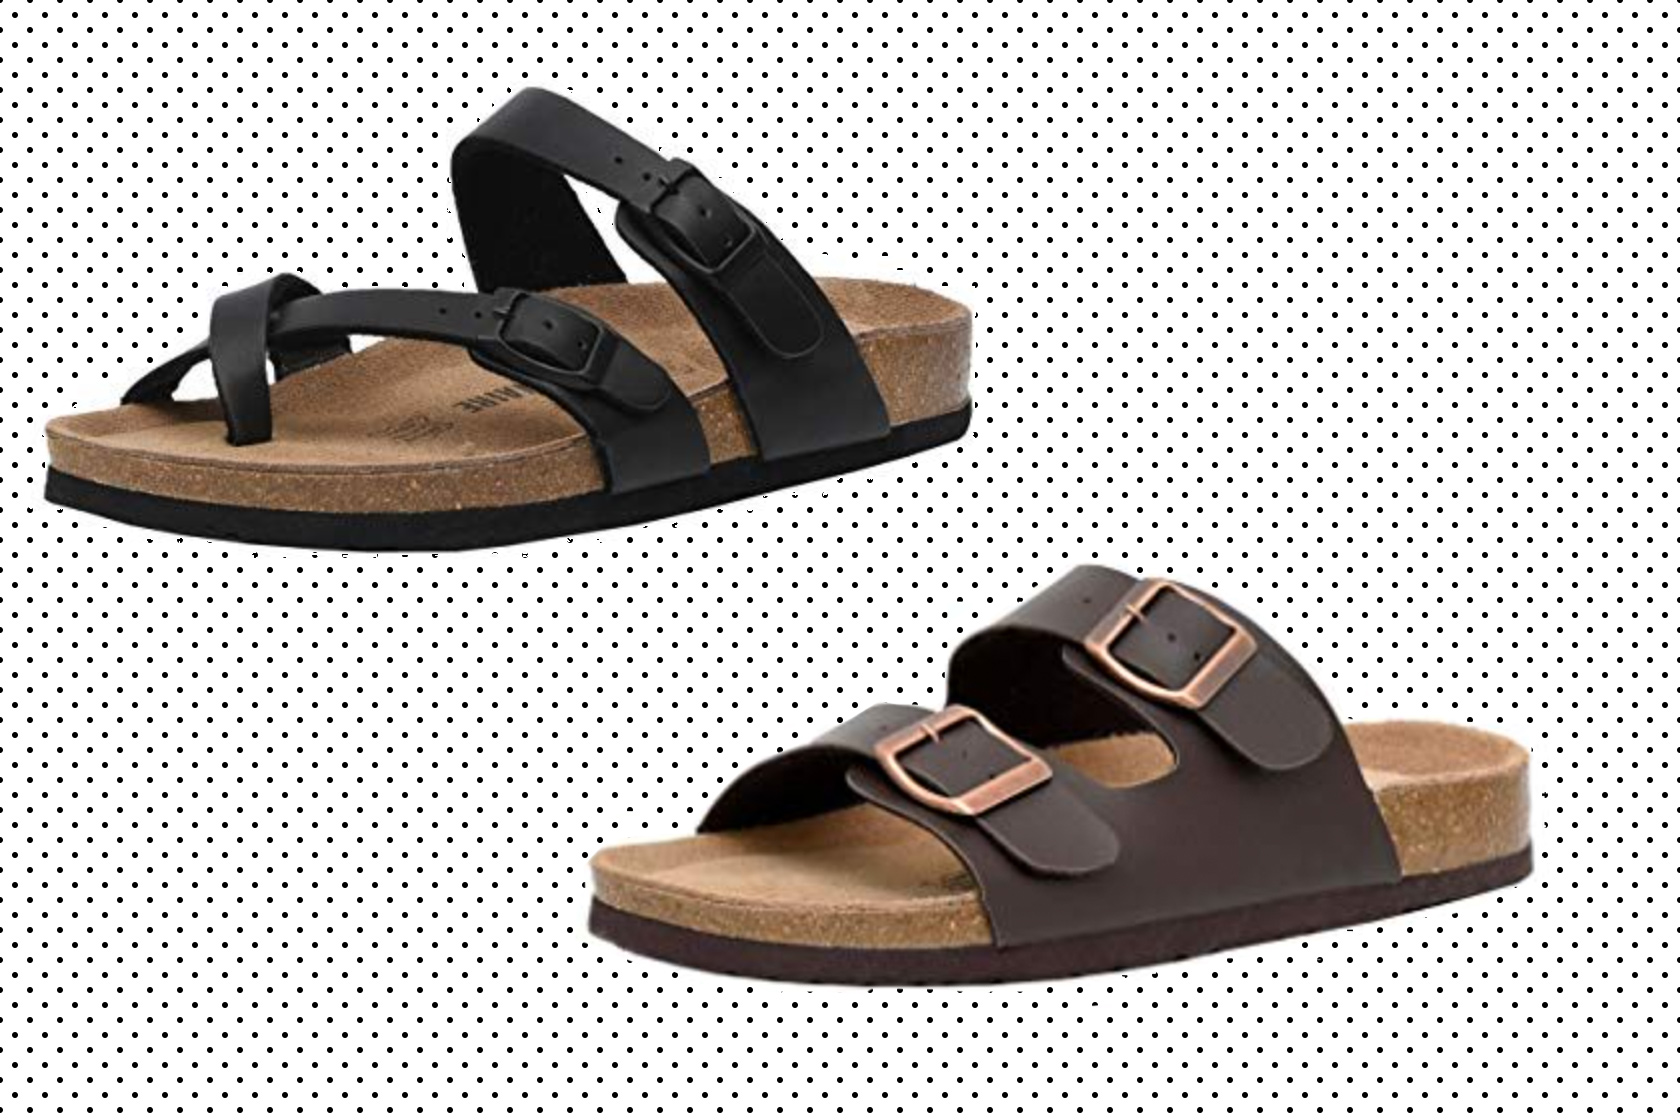 These Birkenstock knockoffs are 1/4 the cost and have 20,000+ ratings ...